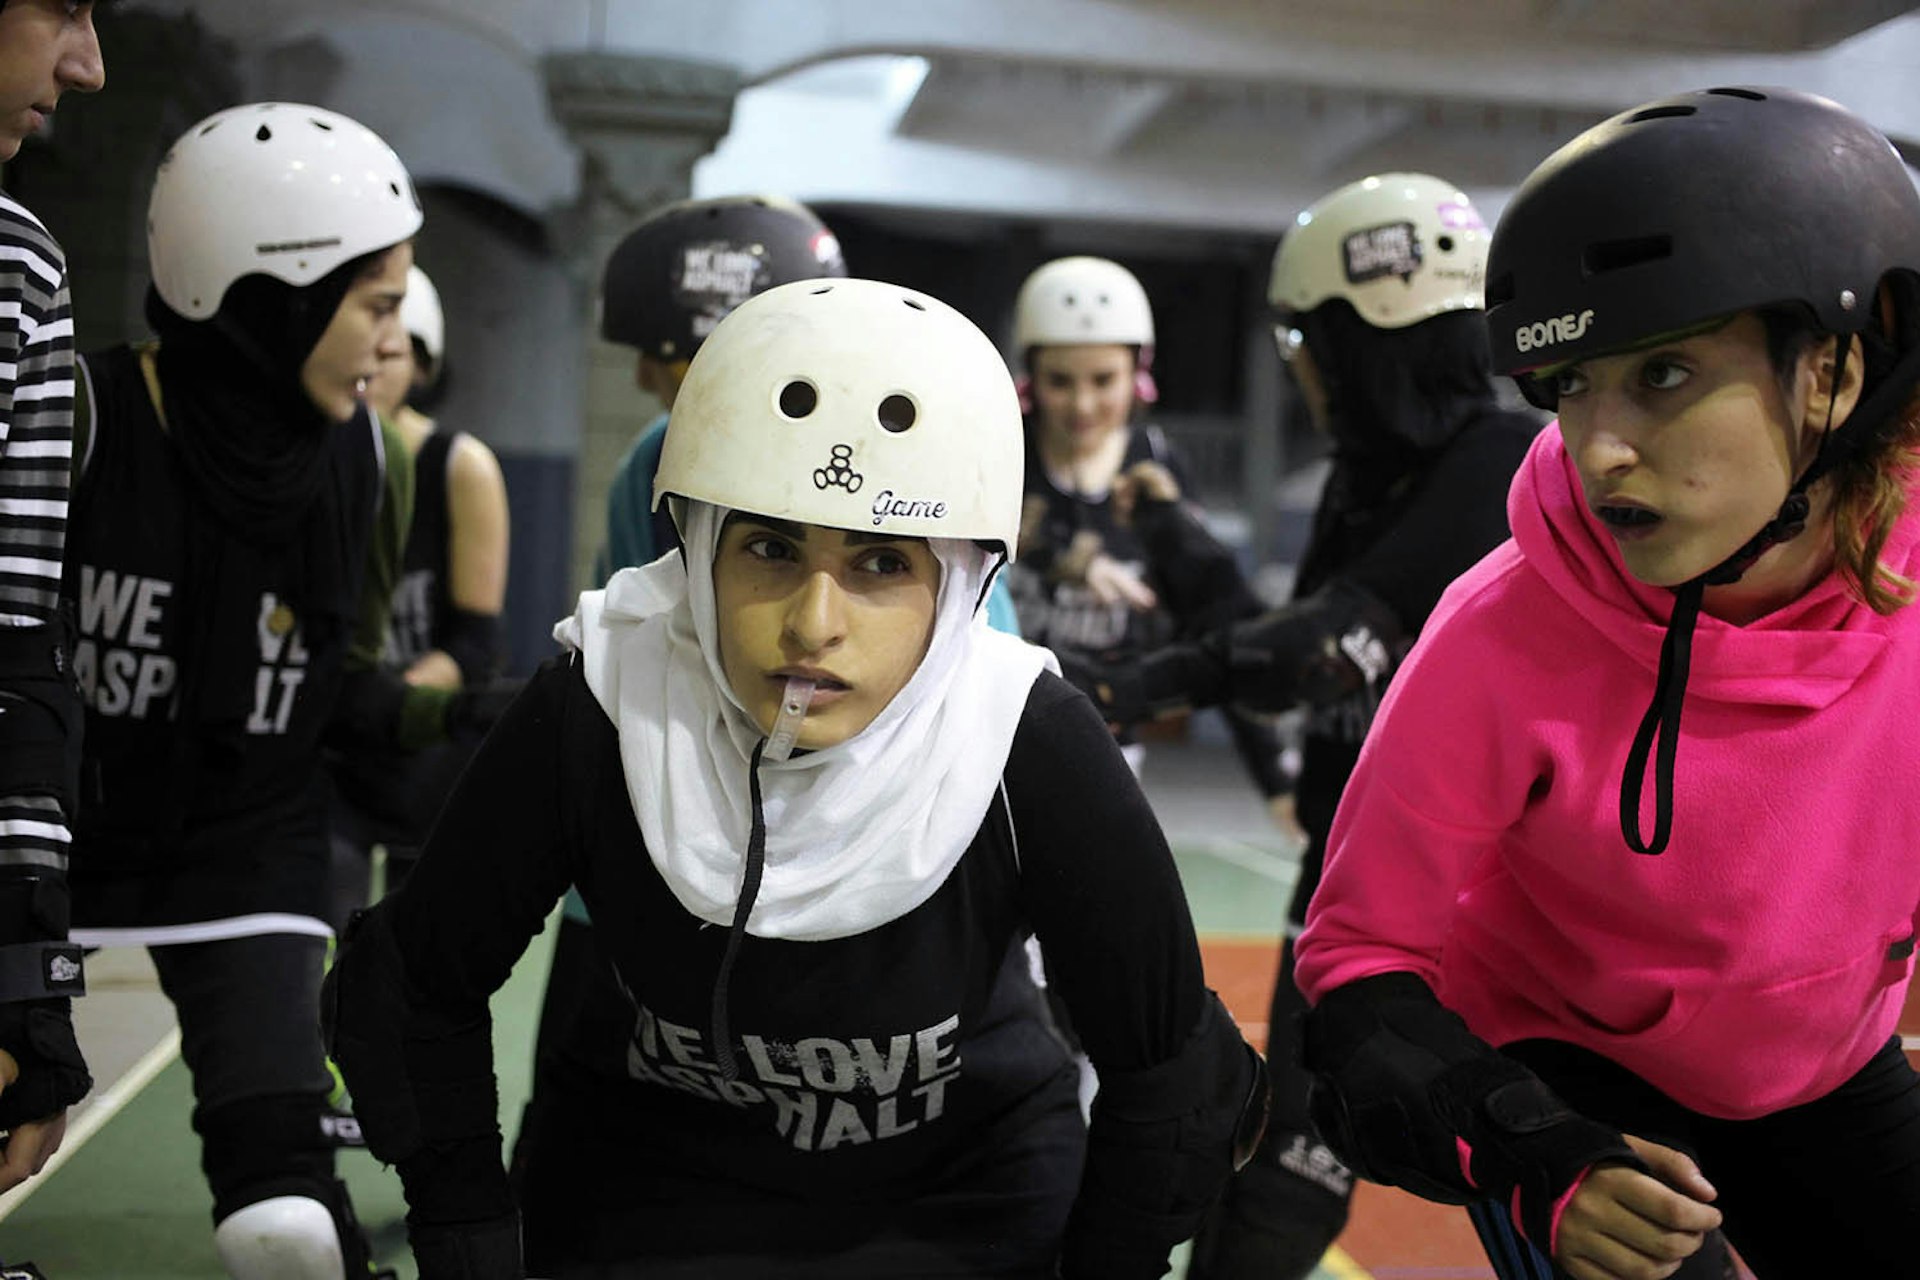 The punk and riot grrrl sounds driving Beirut’s fearless Roller Derby pioneers